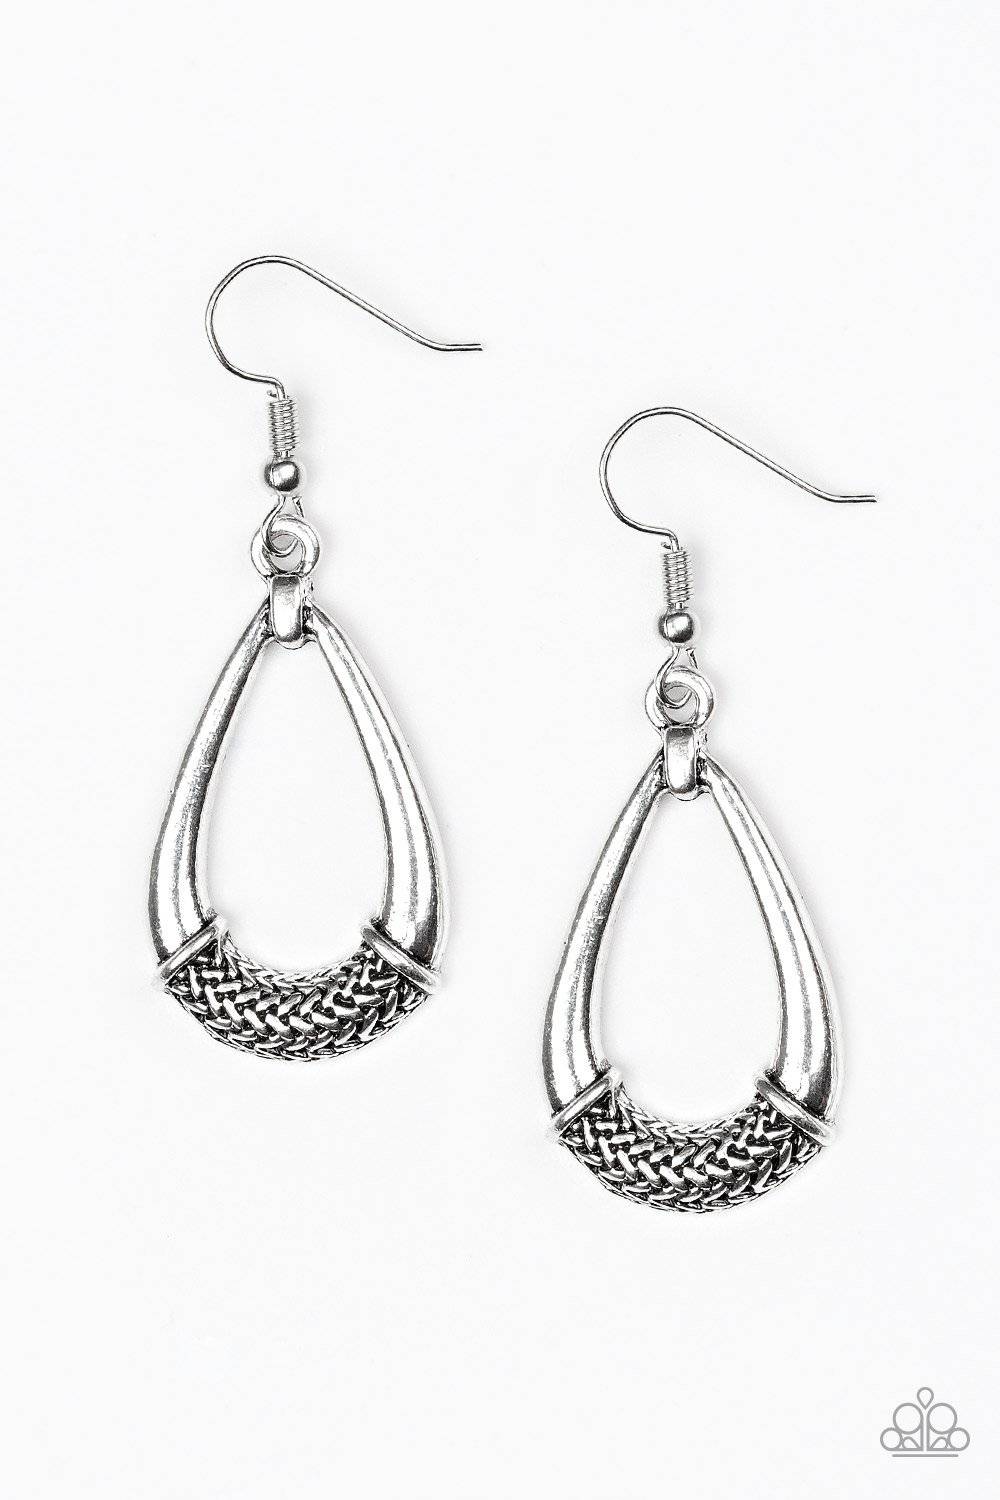 D230 - Trending Texture Earrings by Paparazzi Accessories on Fancy5Fashion.com